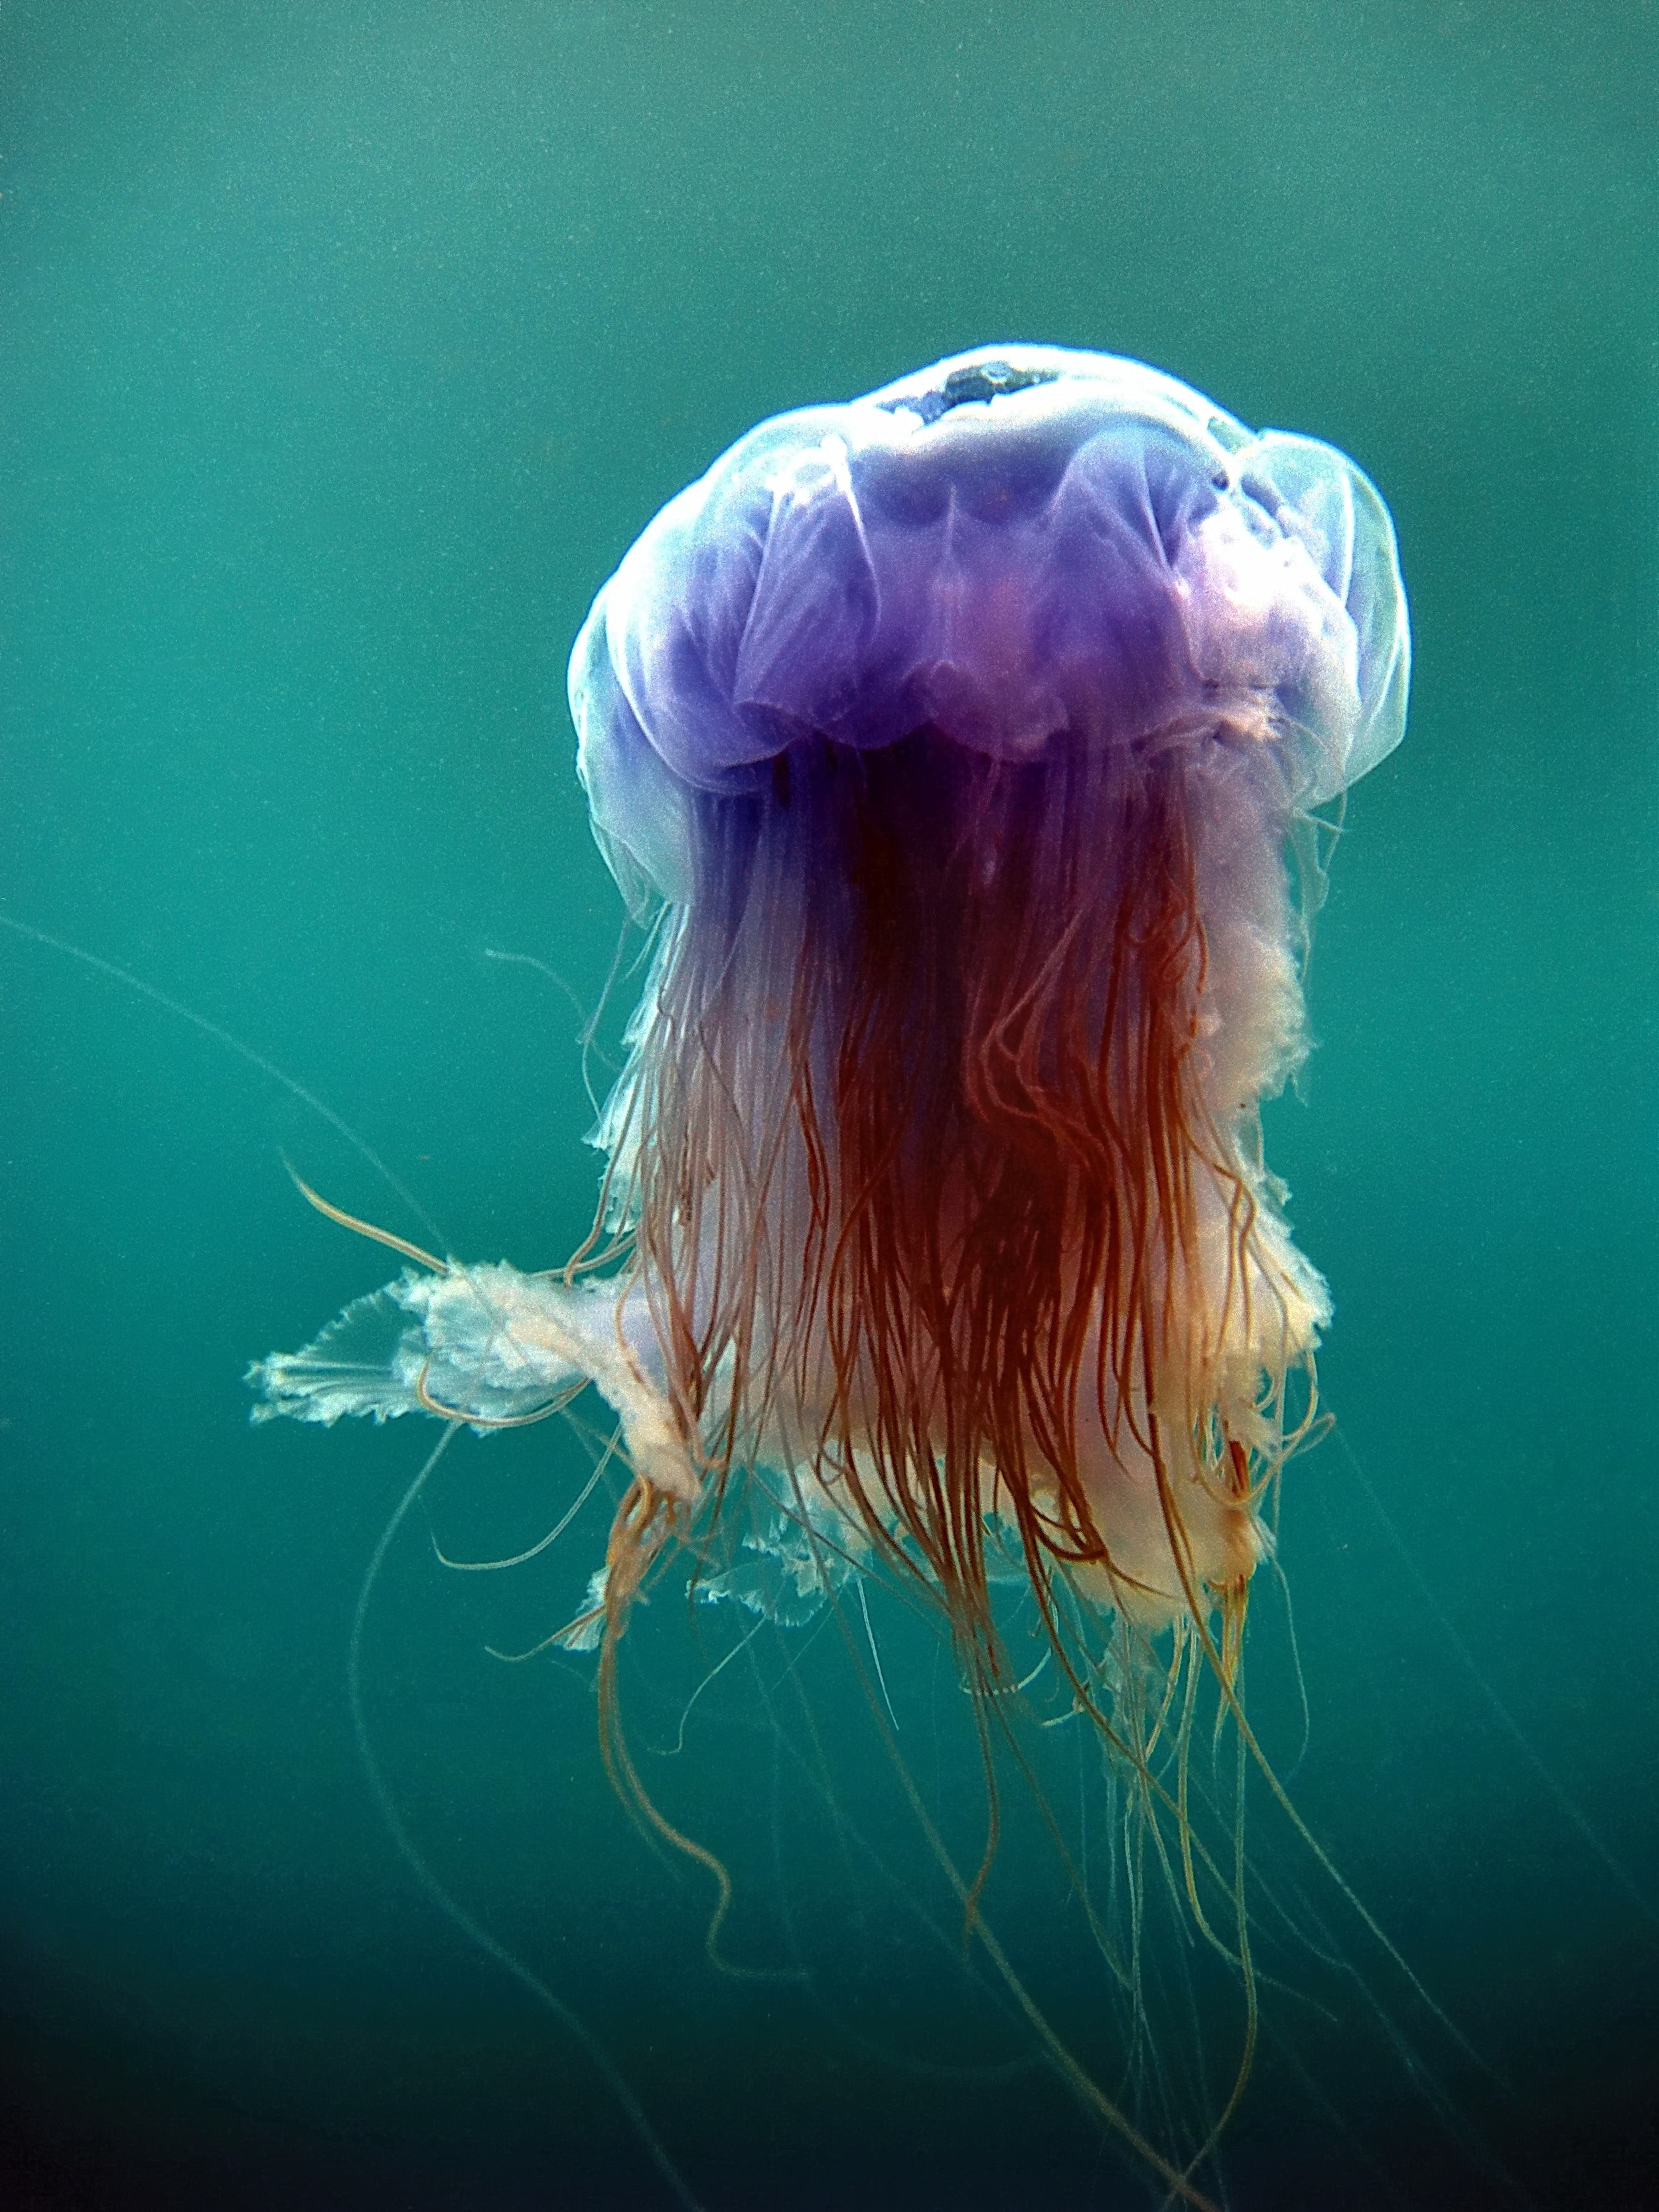 Jellyfish, captured on the east side of Nolsoy